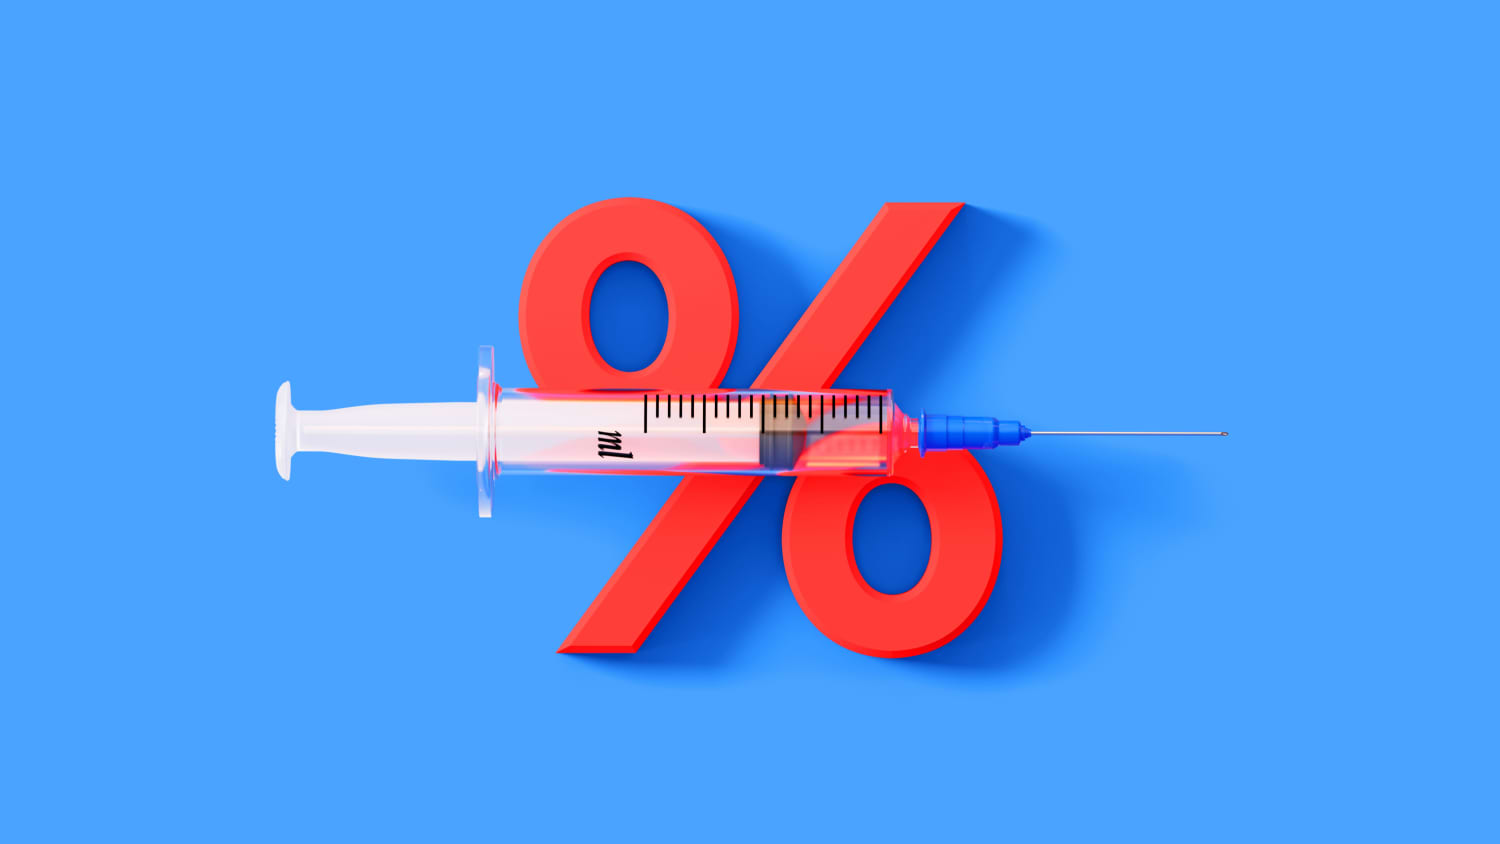 illustration of covid-19 vaccine and percentage sign, representing the difference between efficacy and effectiveness